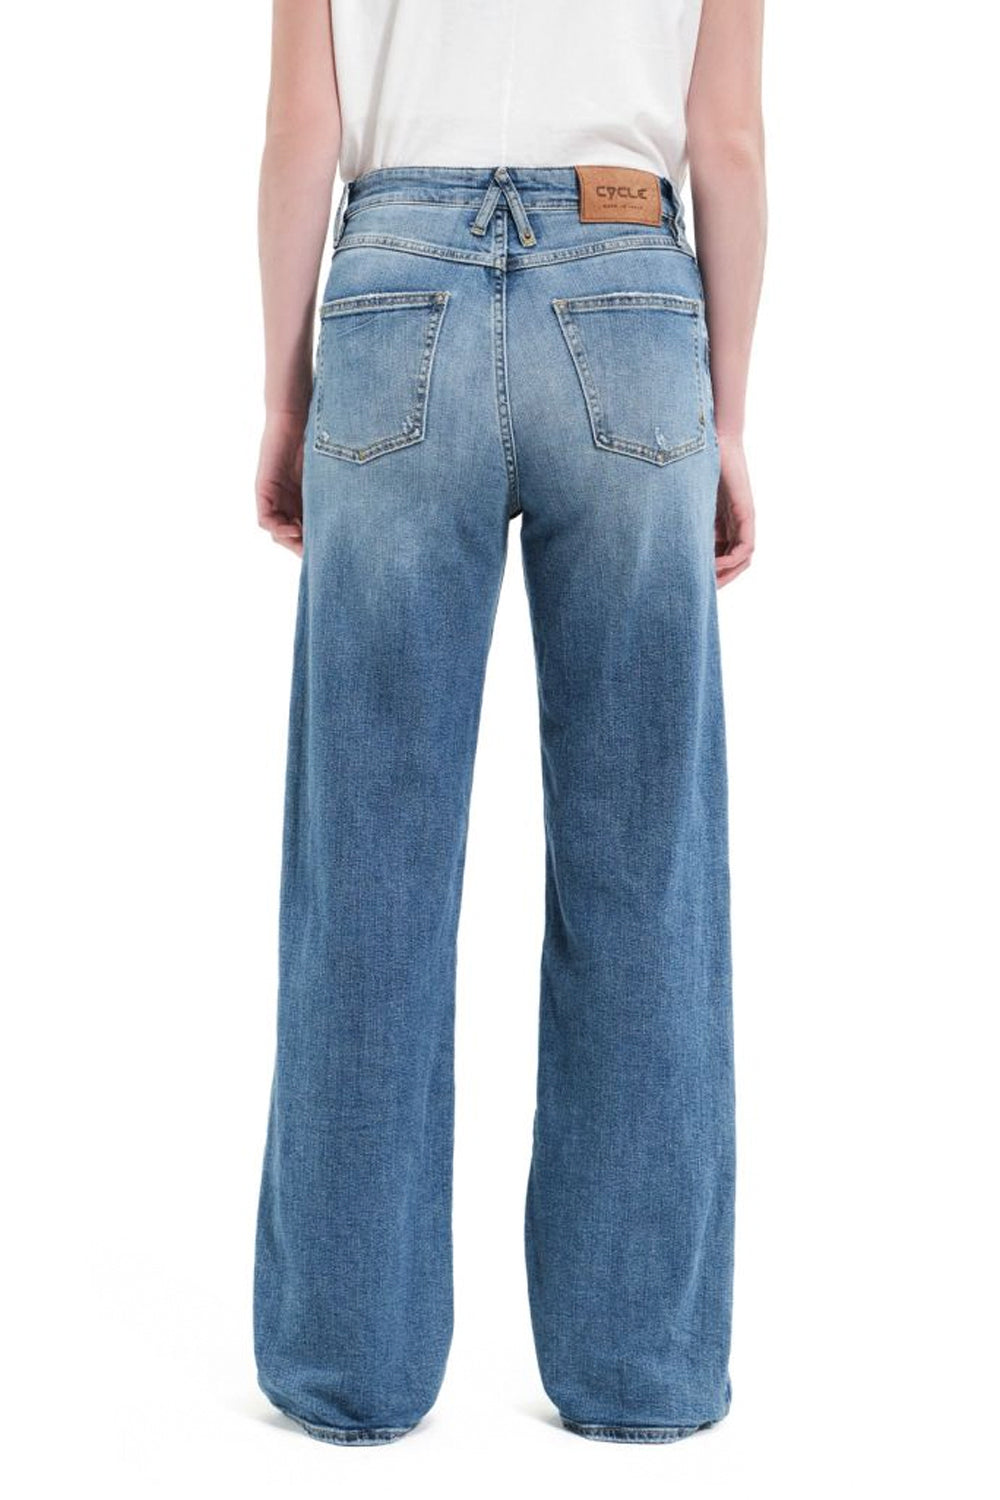 CYCLE Jeans Diana mid rise volume straight leg